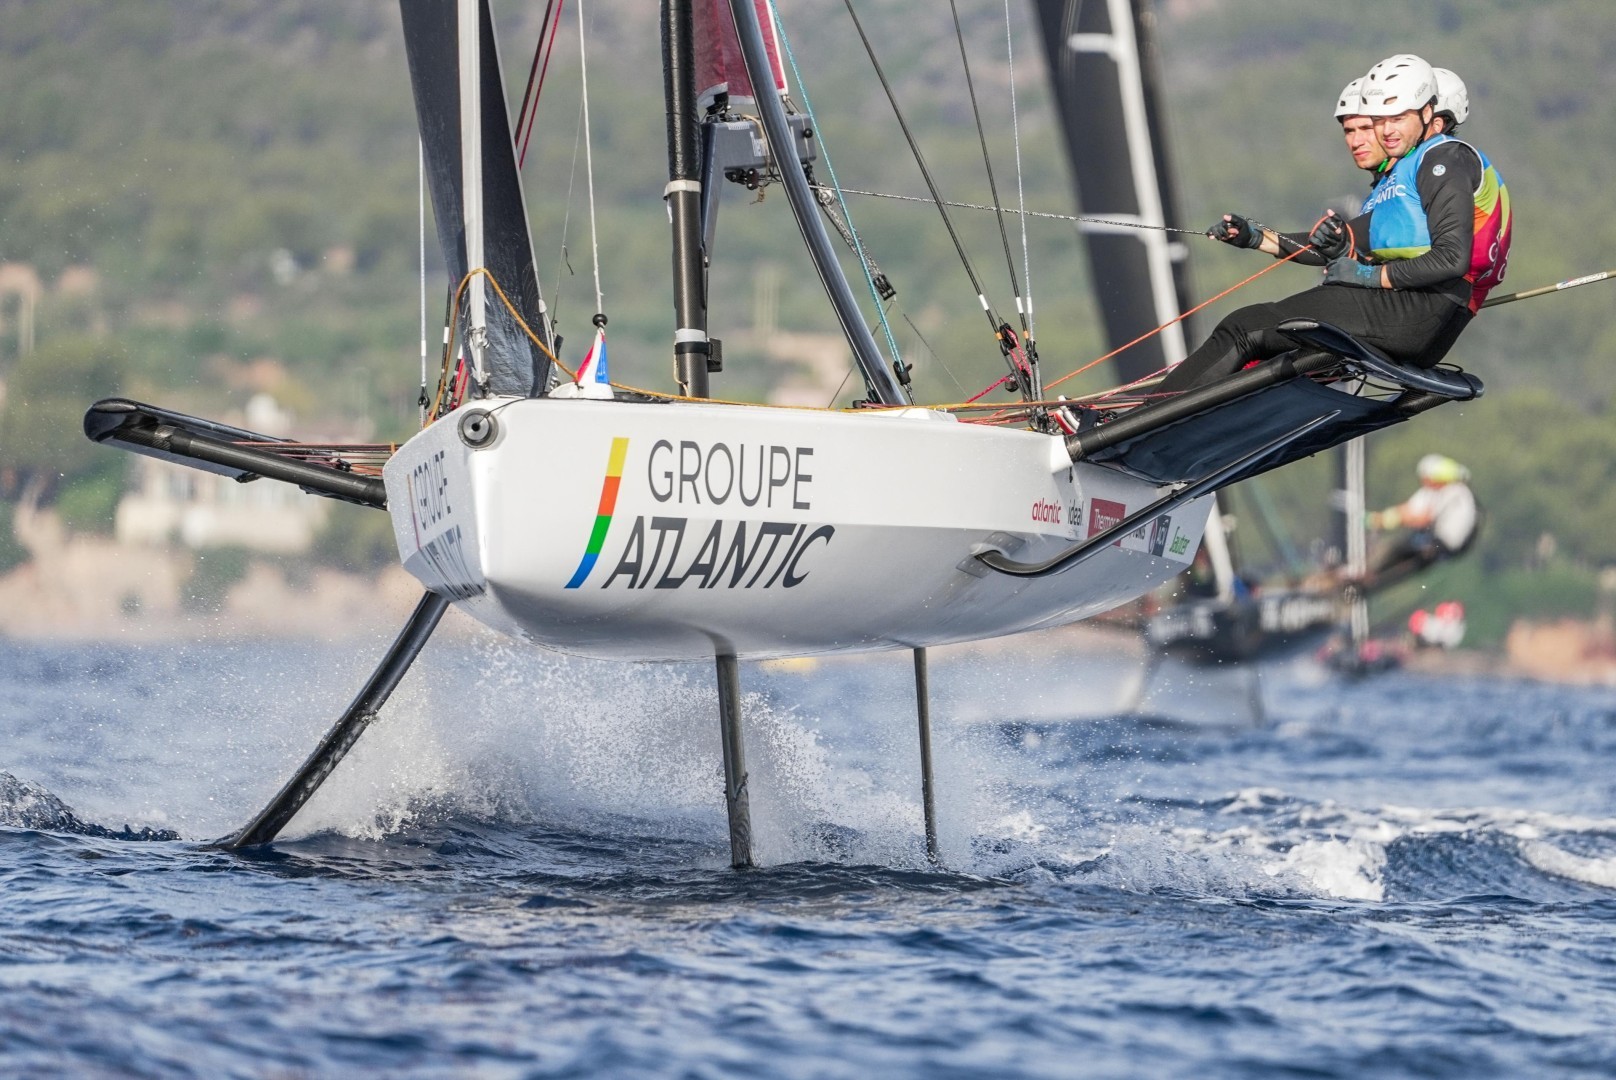 Groupe Atlantic wins the Persico 69F Cup 2022